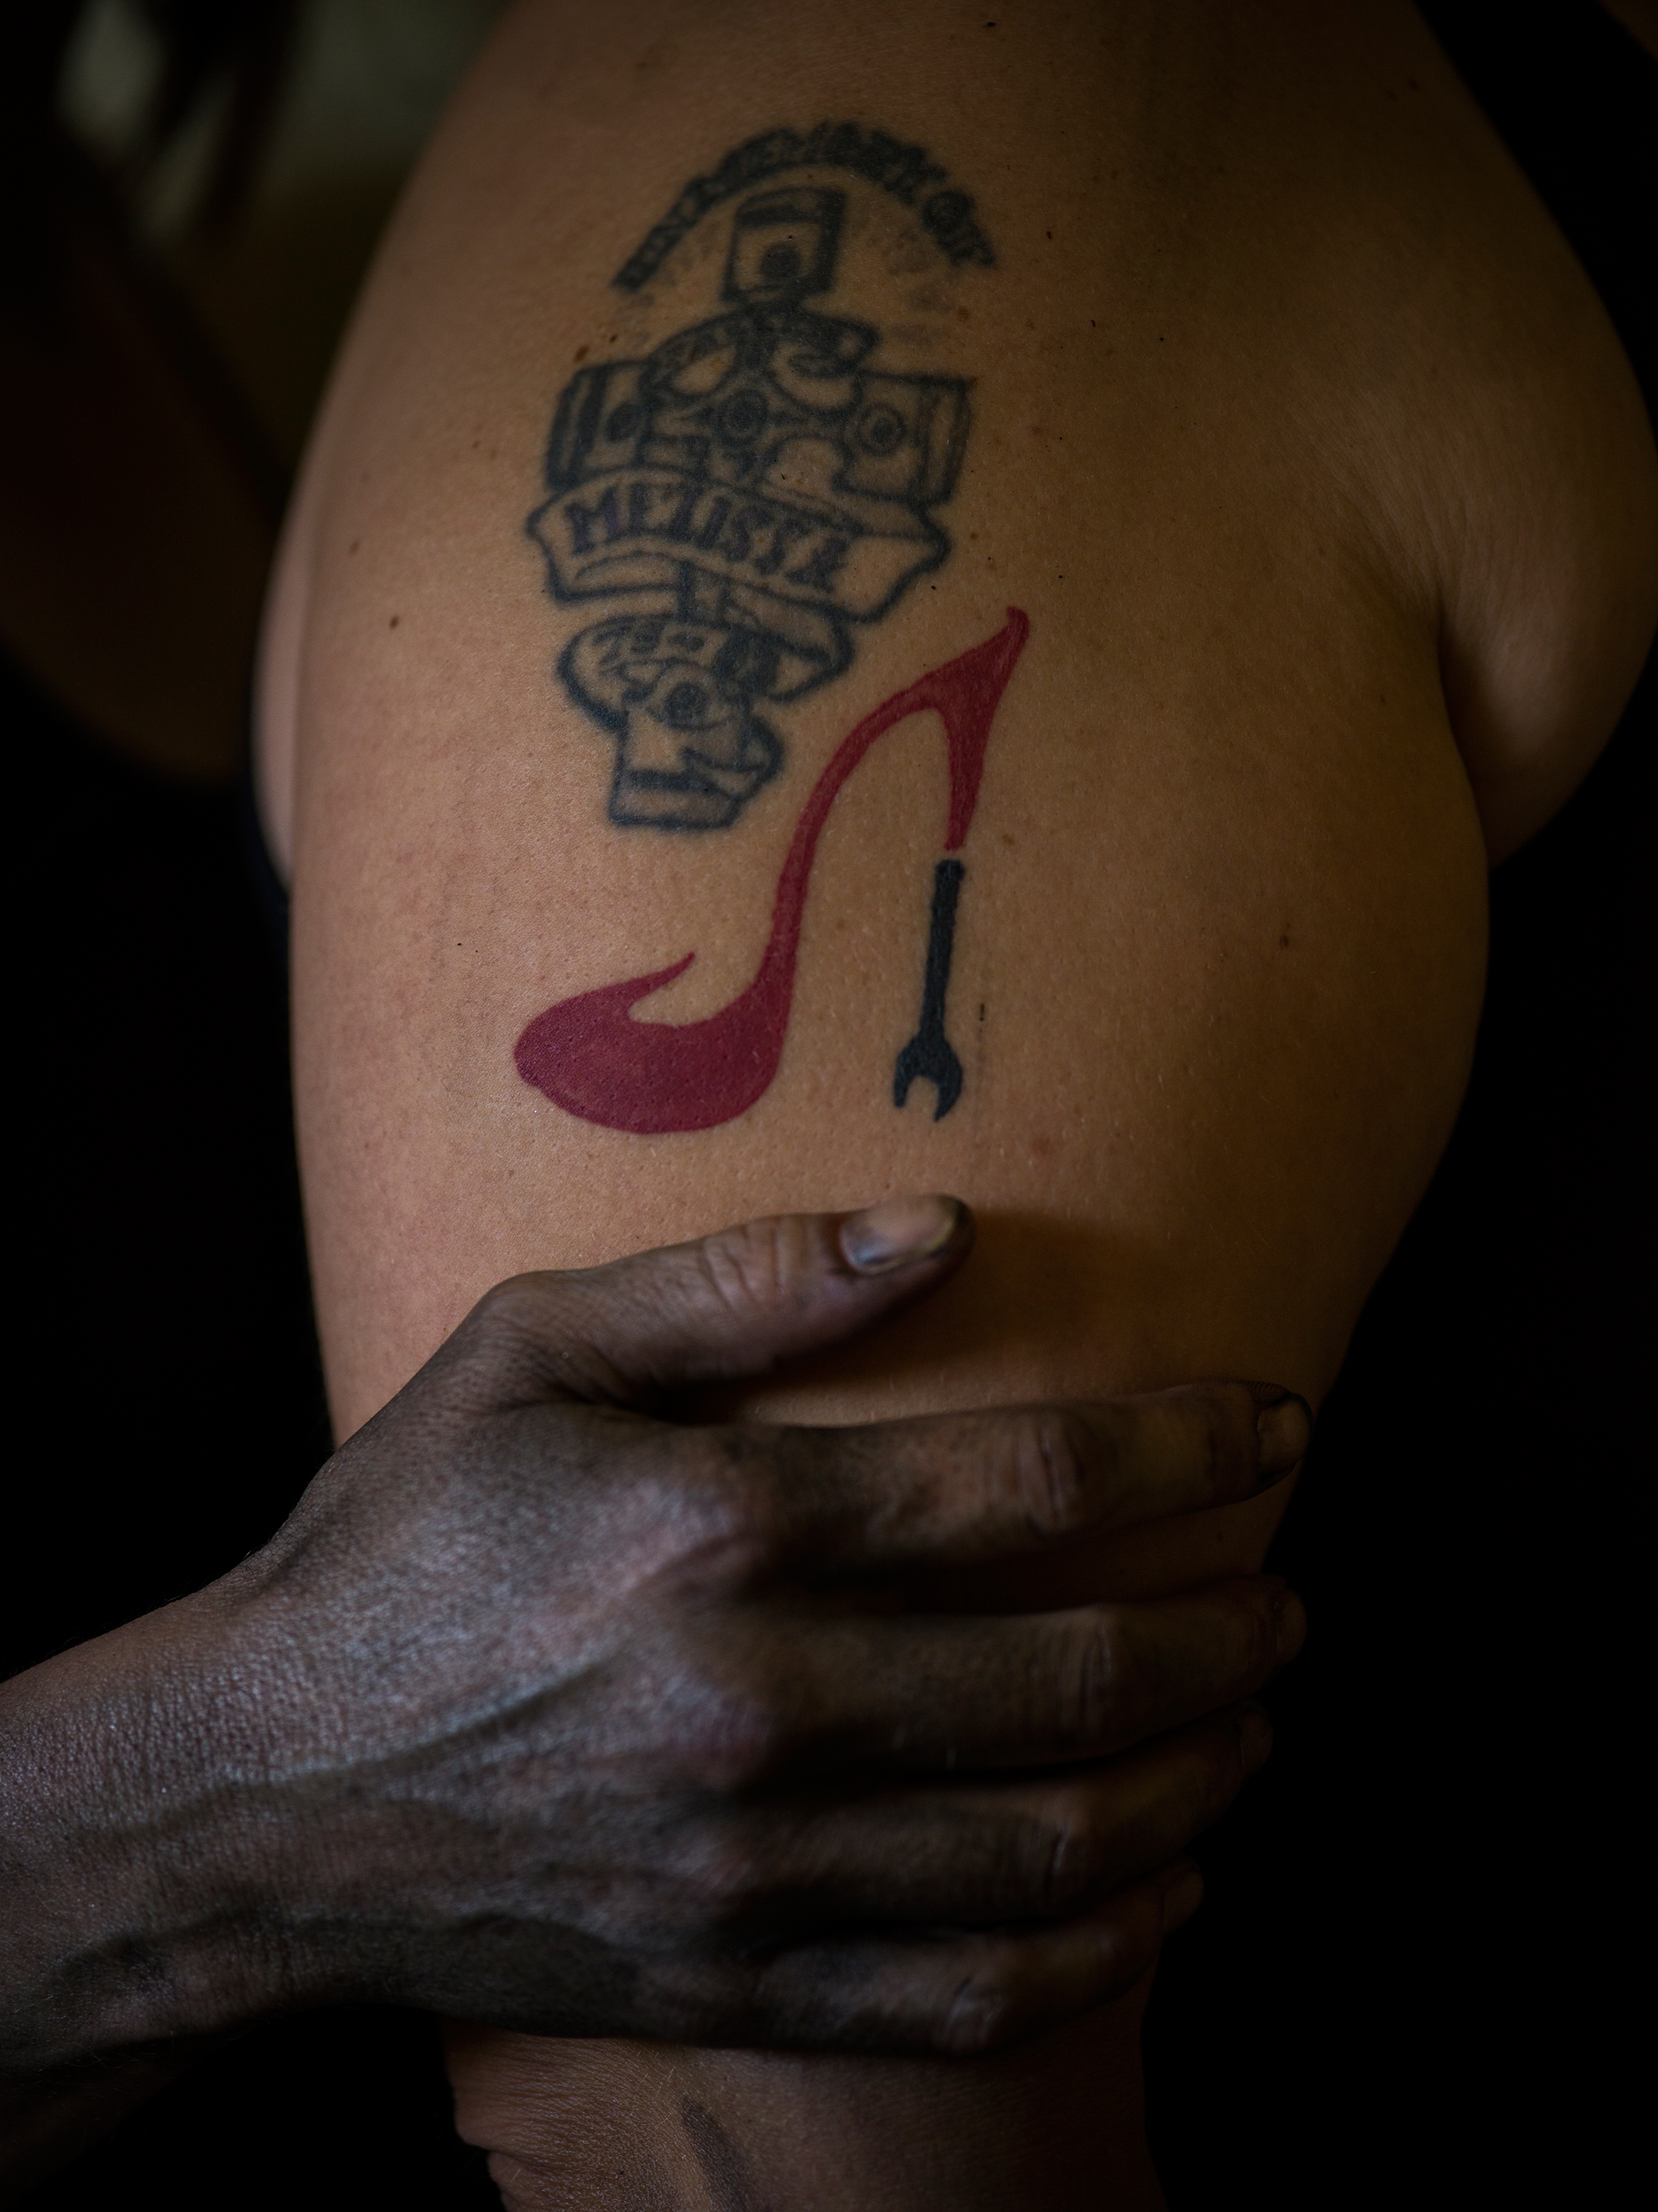 Sweeney and Banks each sport a tattoo of the Girls Auto Clinic logo. (Michal Chelbin for TIME)